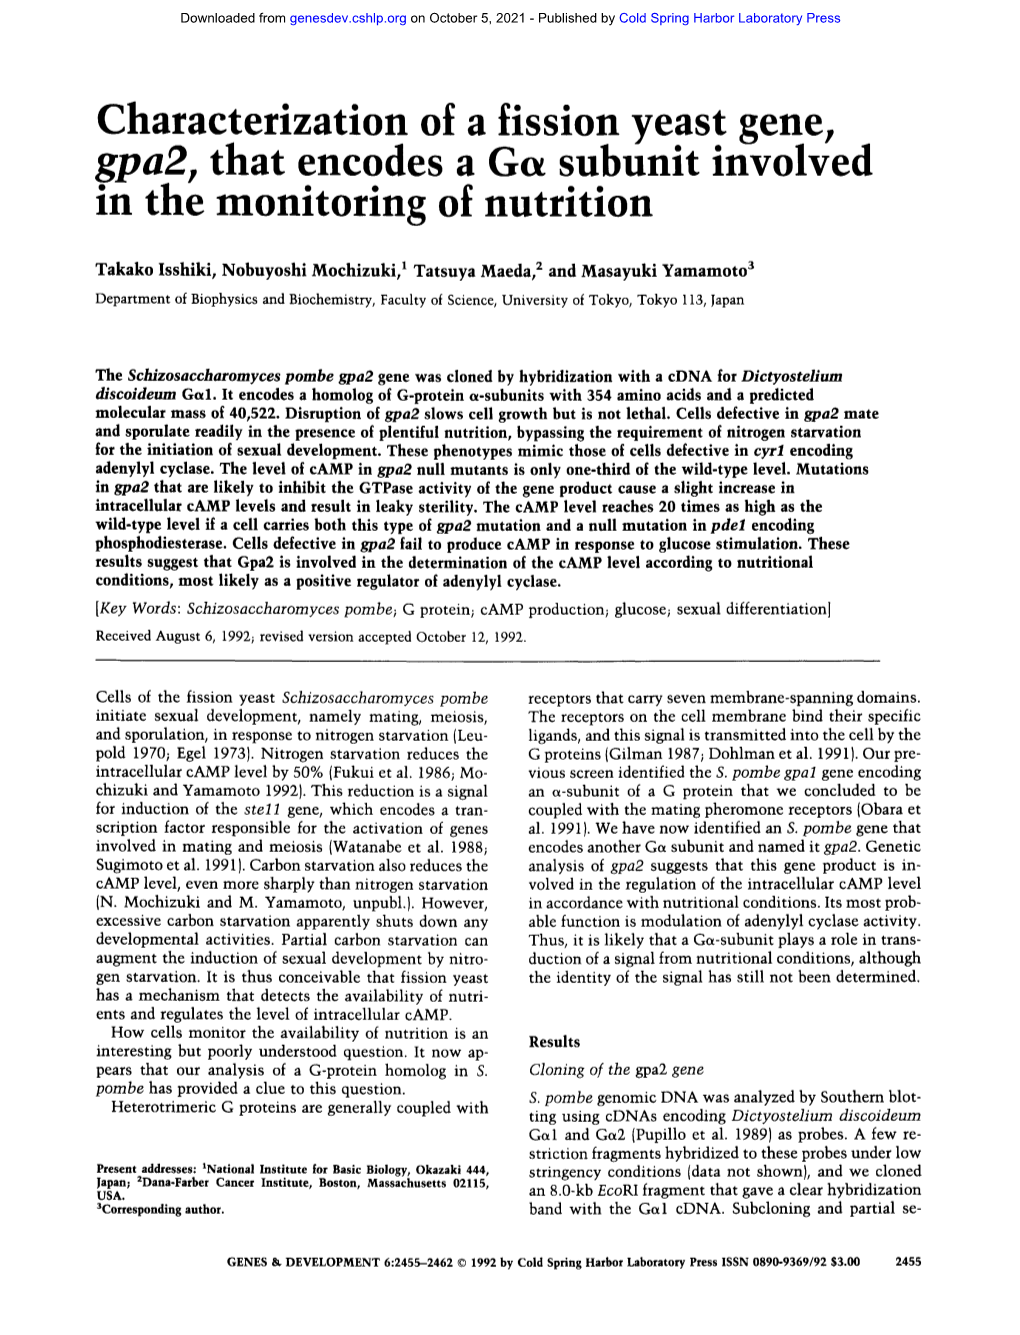 Characterization of a Fission Yeast Gene, Gpa2, That Encodes a Subunit Involved in the Monitoring of Nutrition